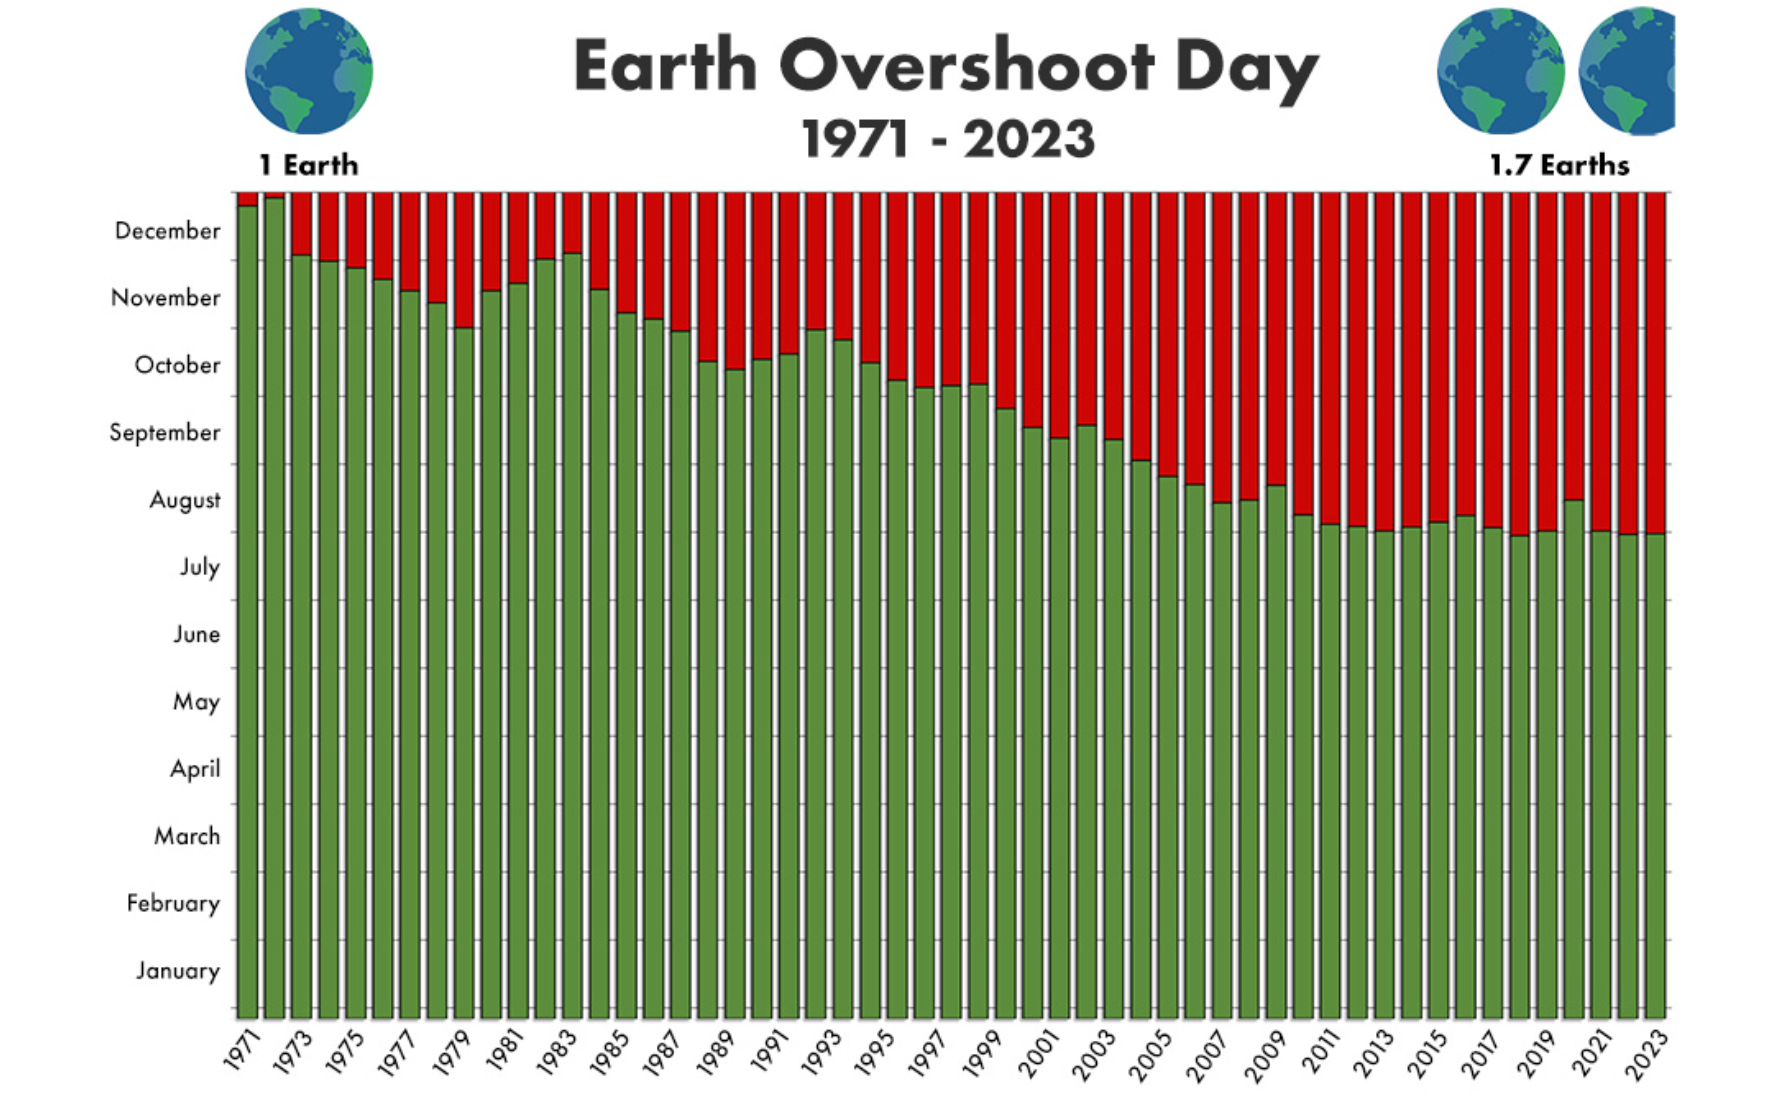 Earth Overshoot Day has moved earlier in the year since the 1970s